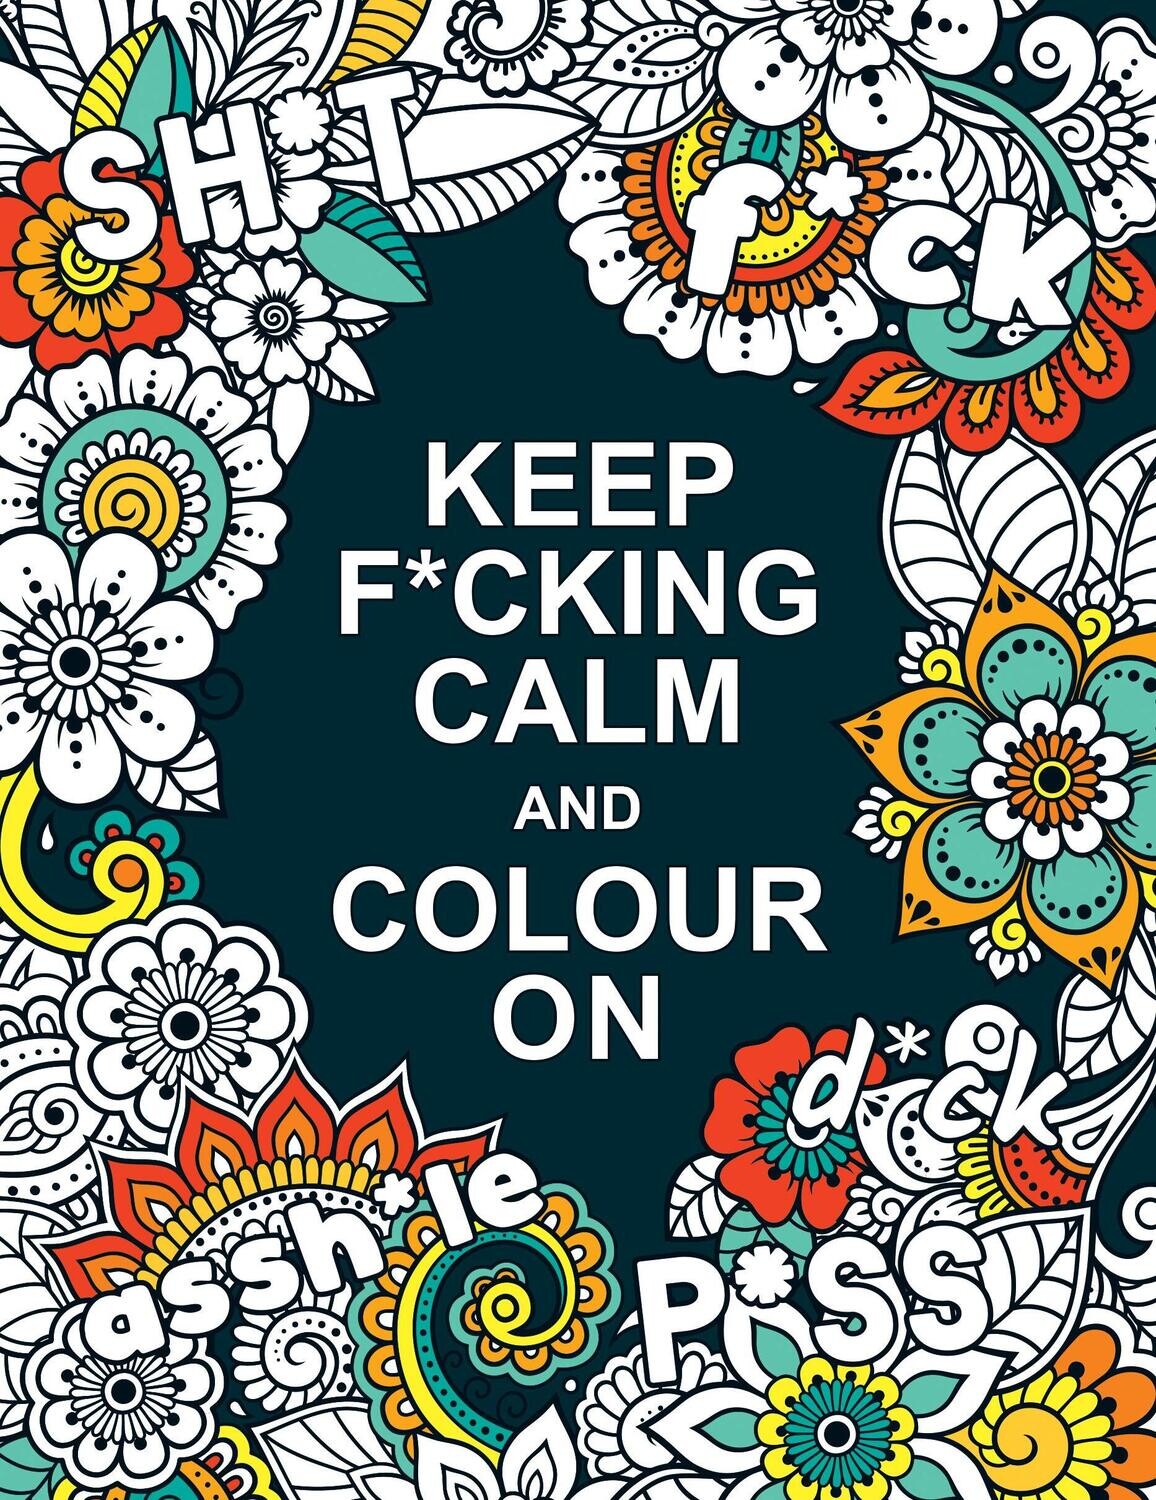 Keep F*cking Calm and Color On